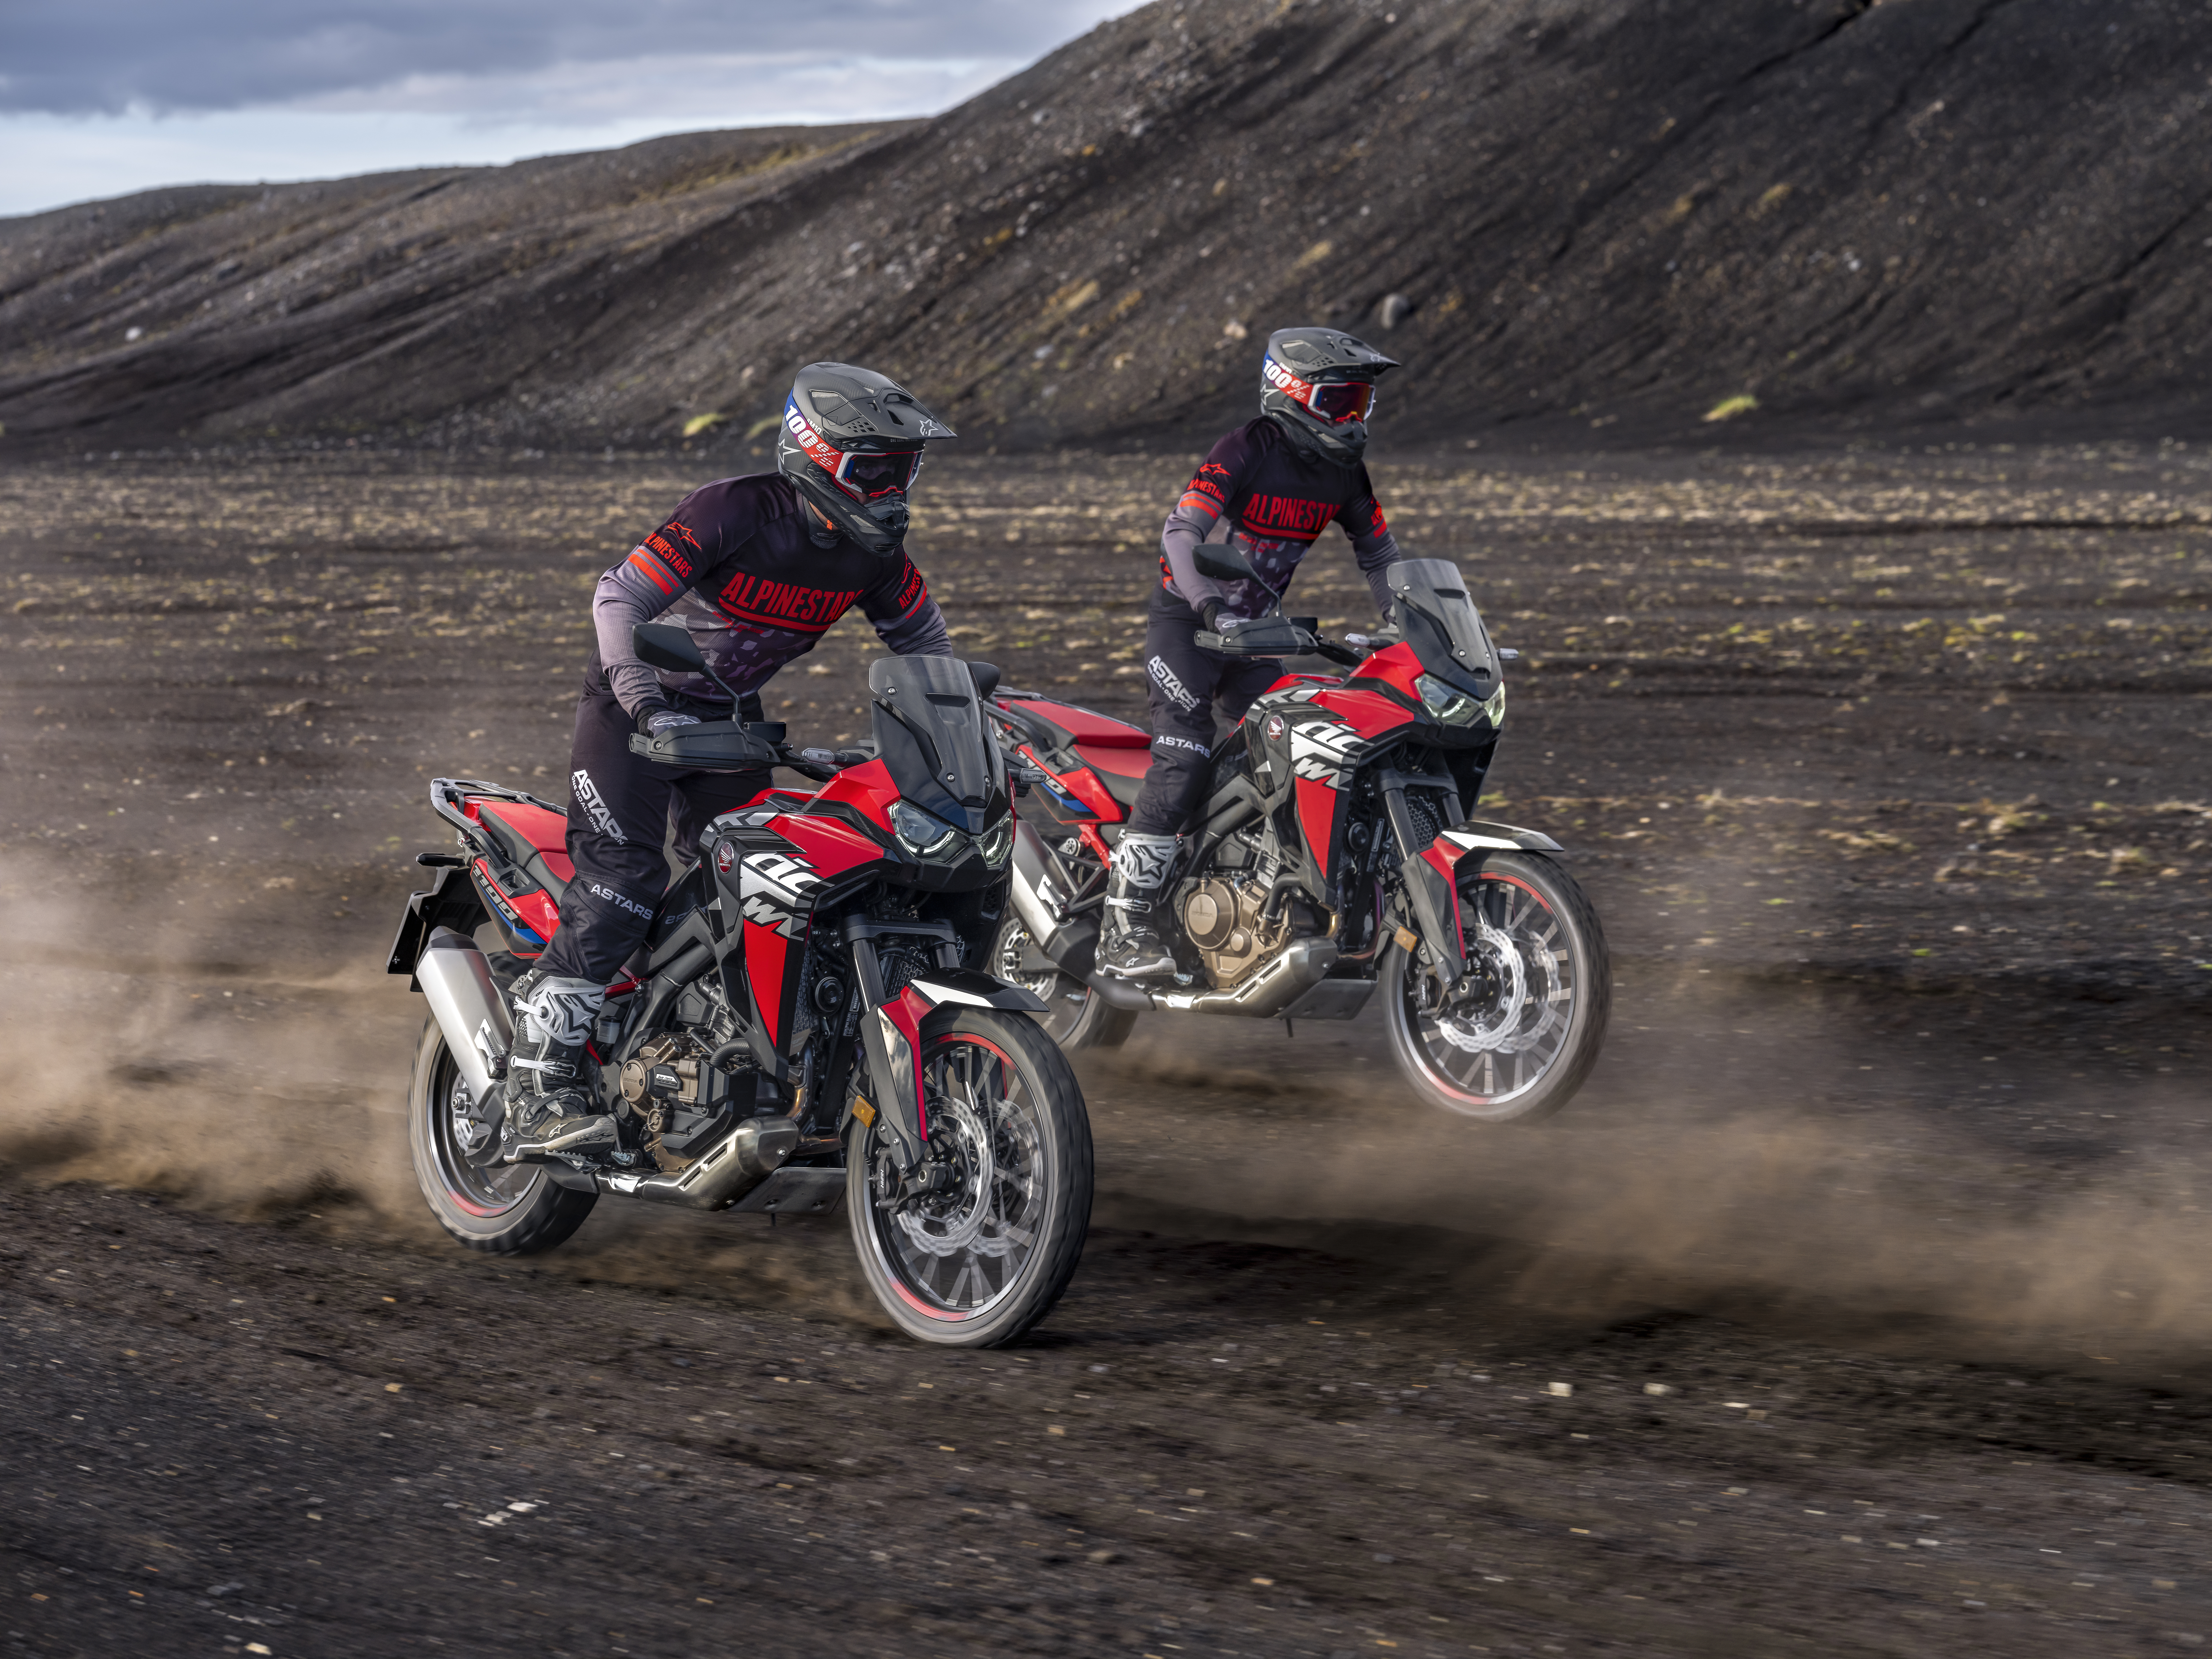 Africa twin